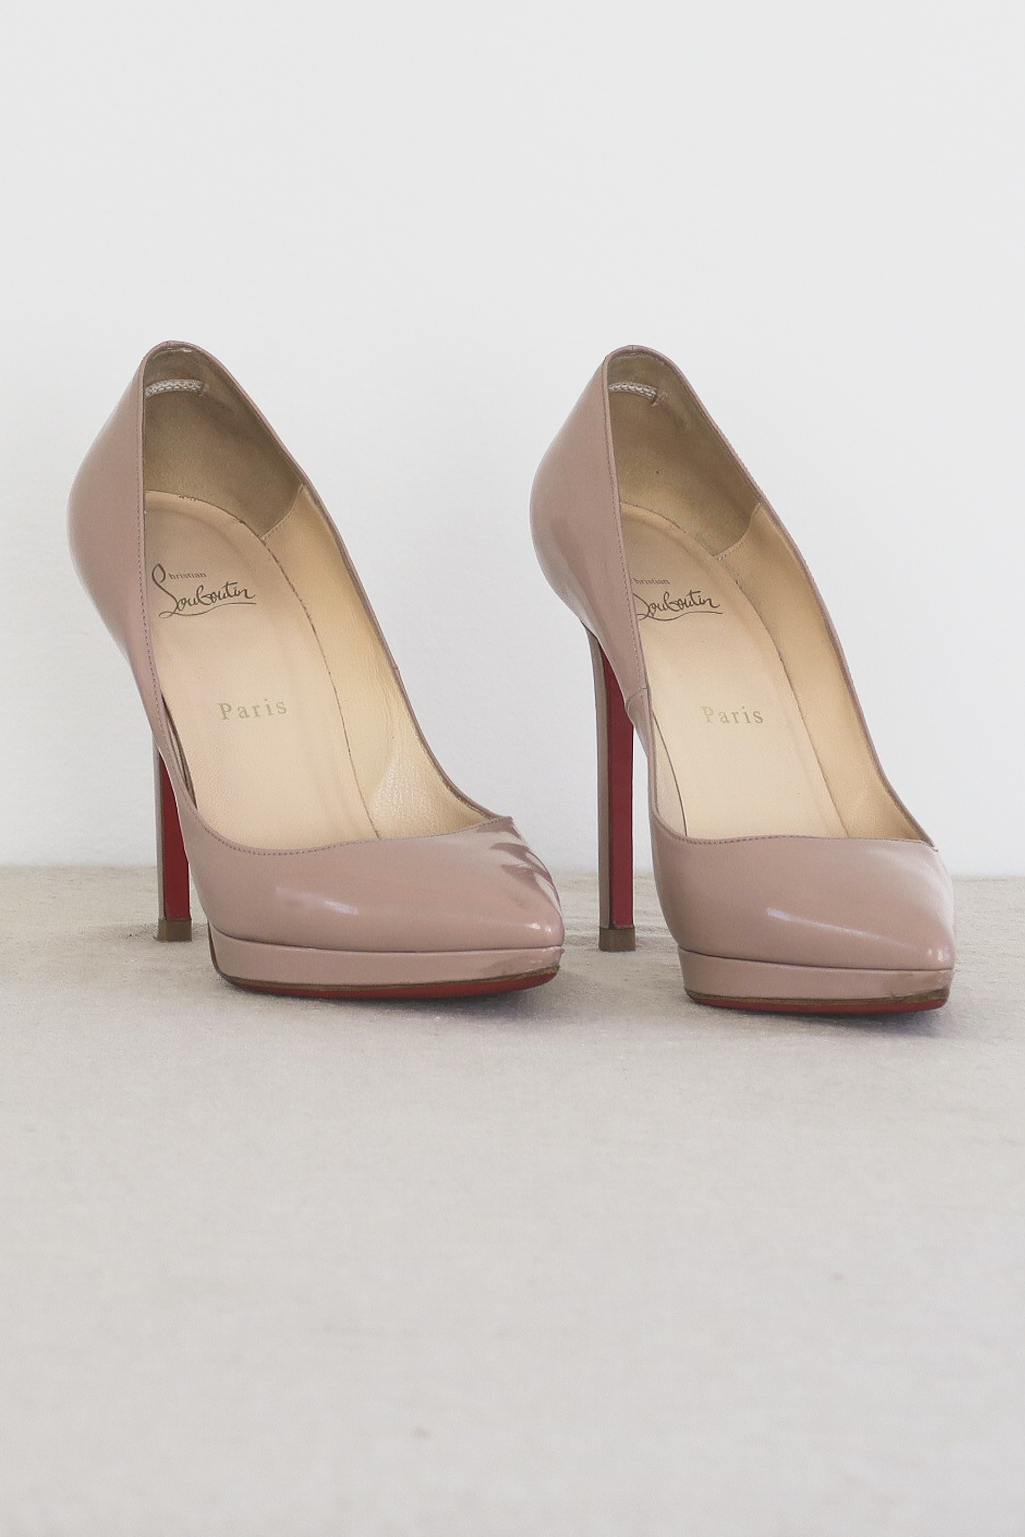 Christian Louboutin Pigalle Plato Pumps – Sammy and Sid